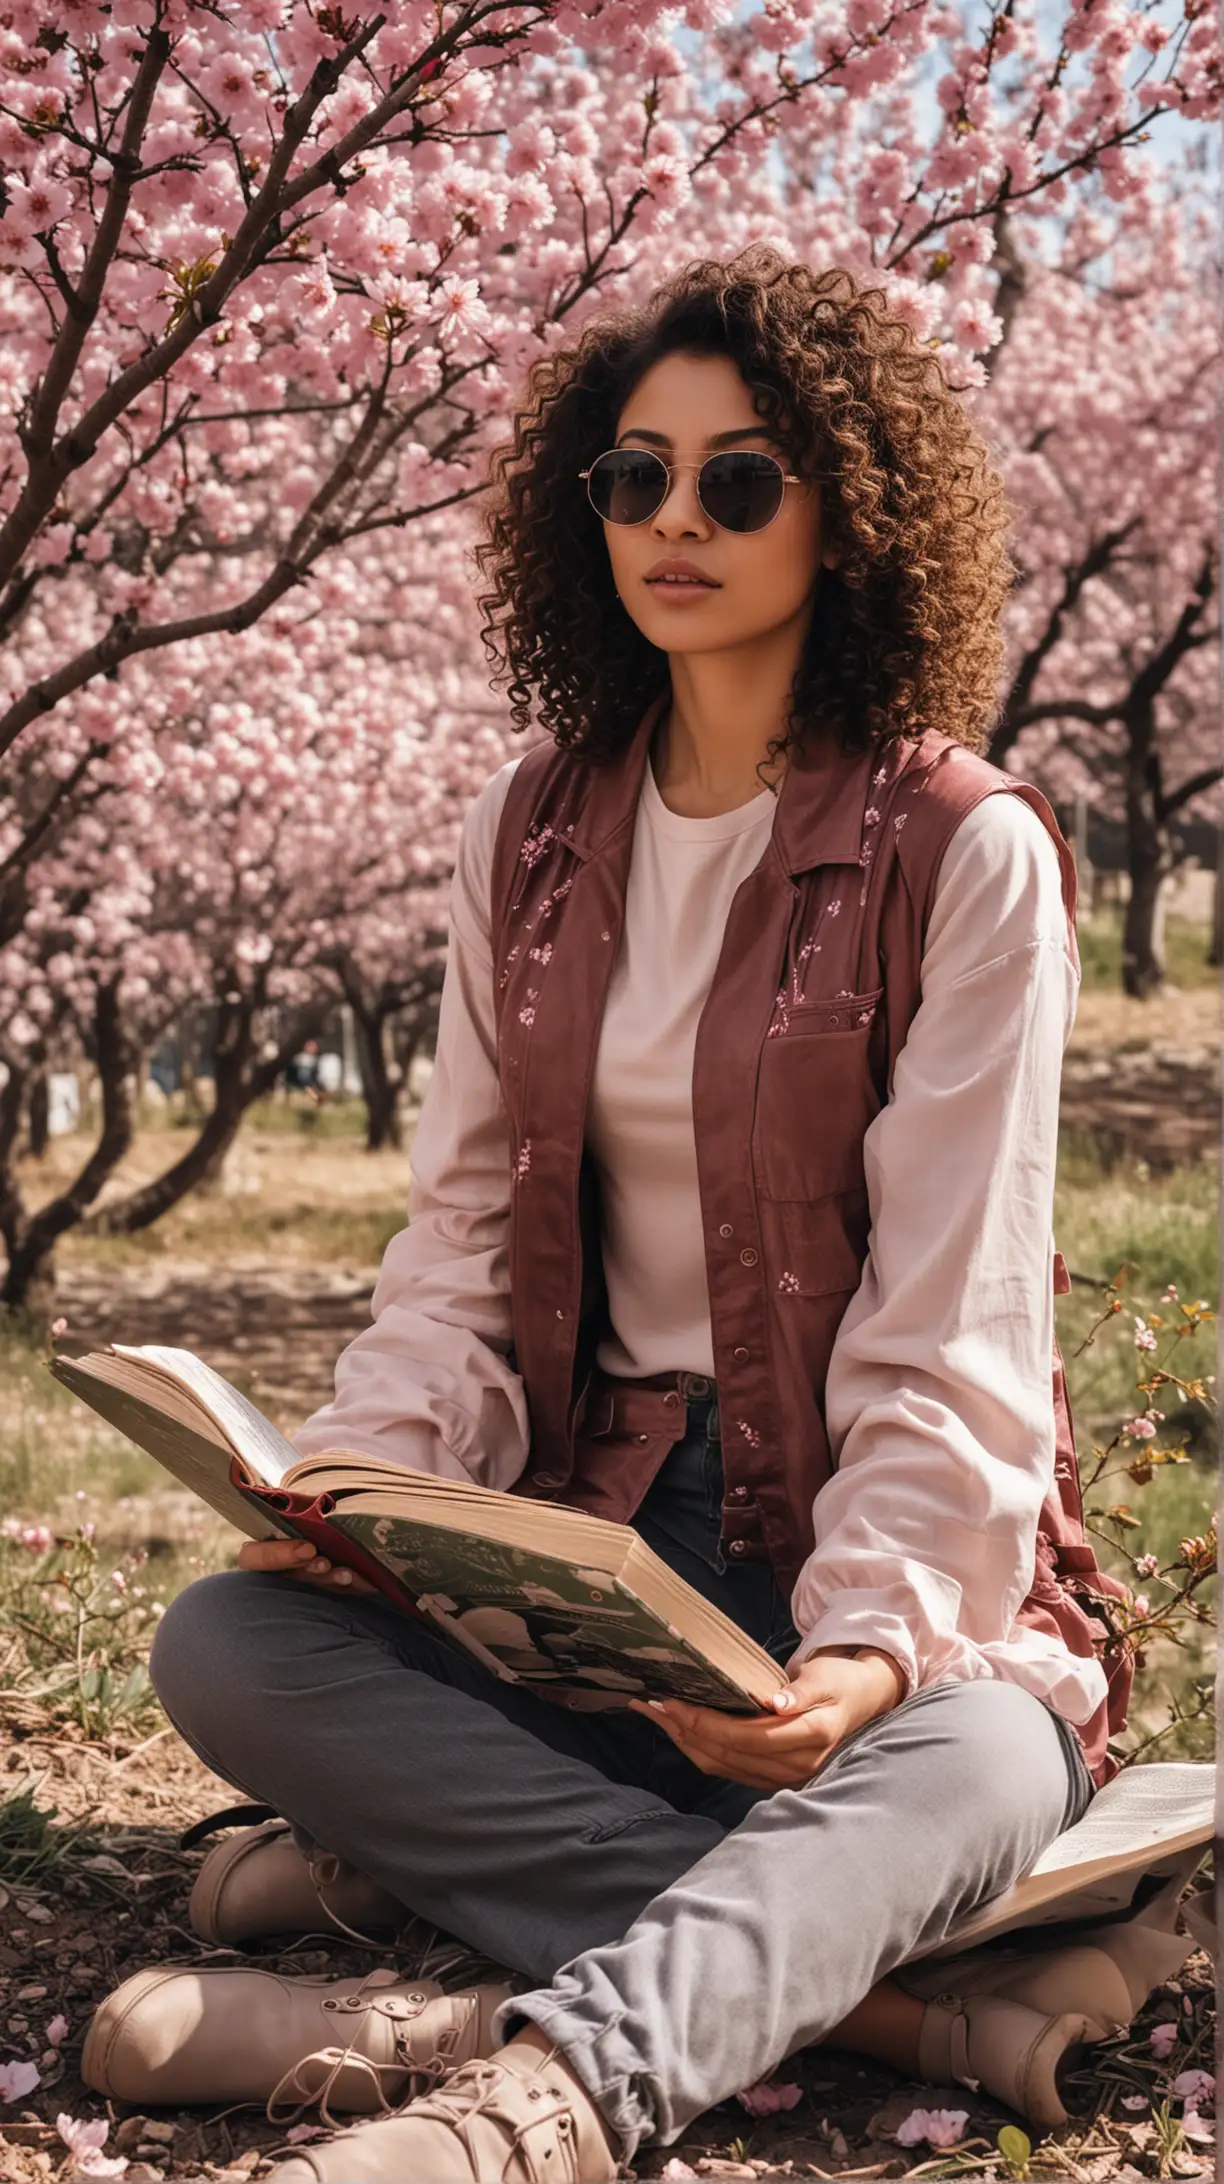 diverse girl, curly hair, wearing sunglasses sitting under a cherry blossom tree, reading books, in wasteland background, wearing trinity from the matrix outfit

